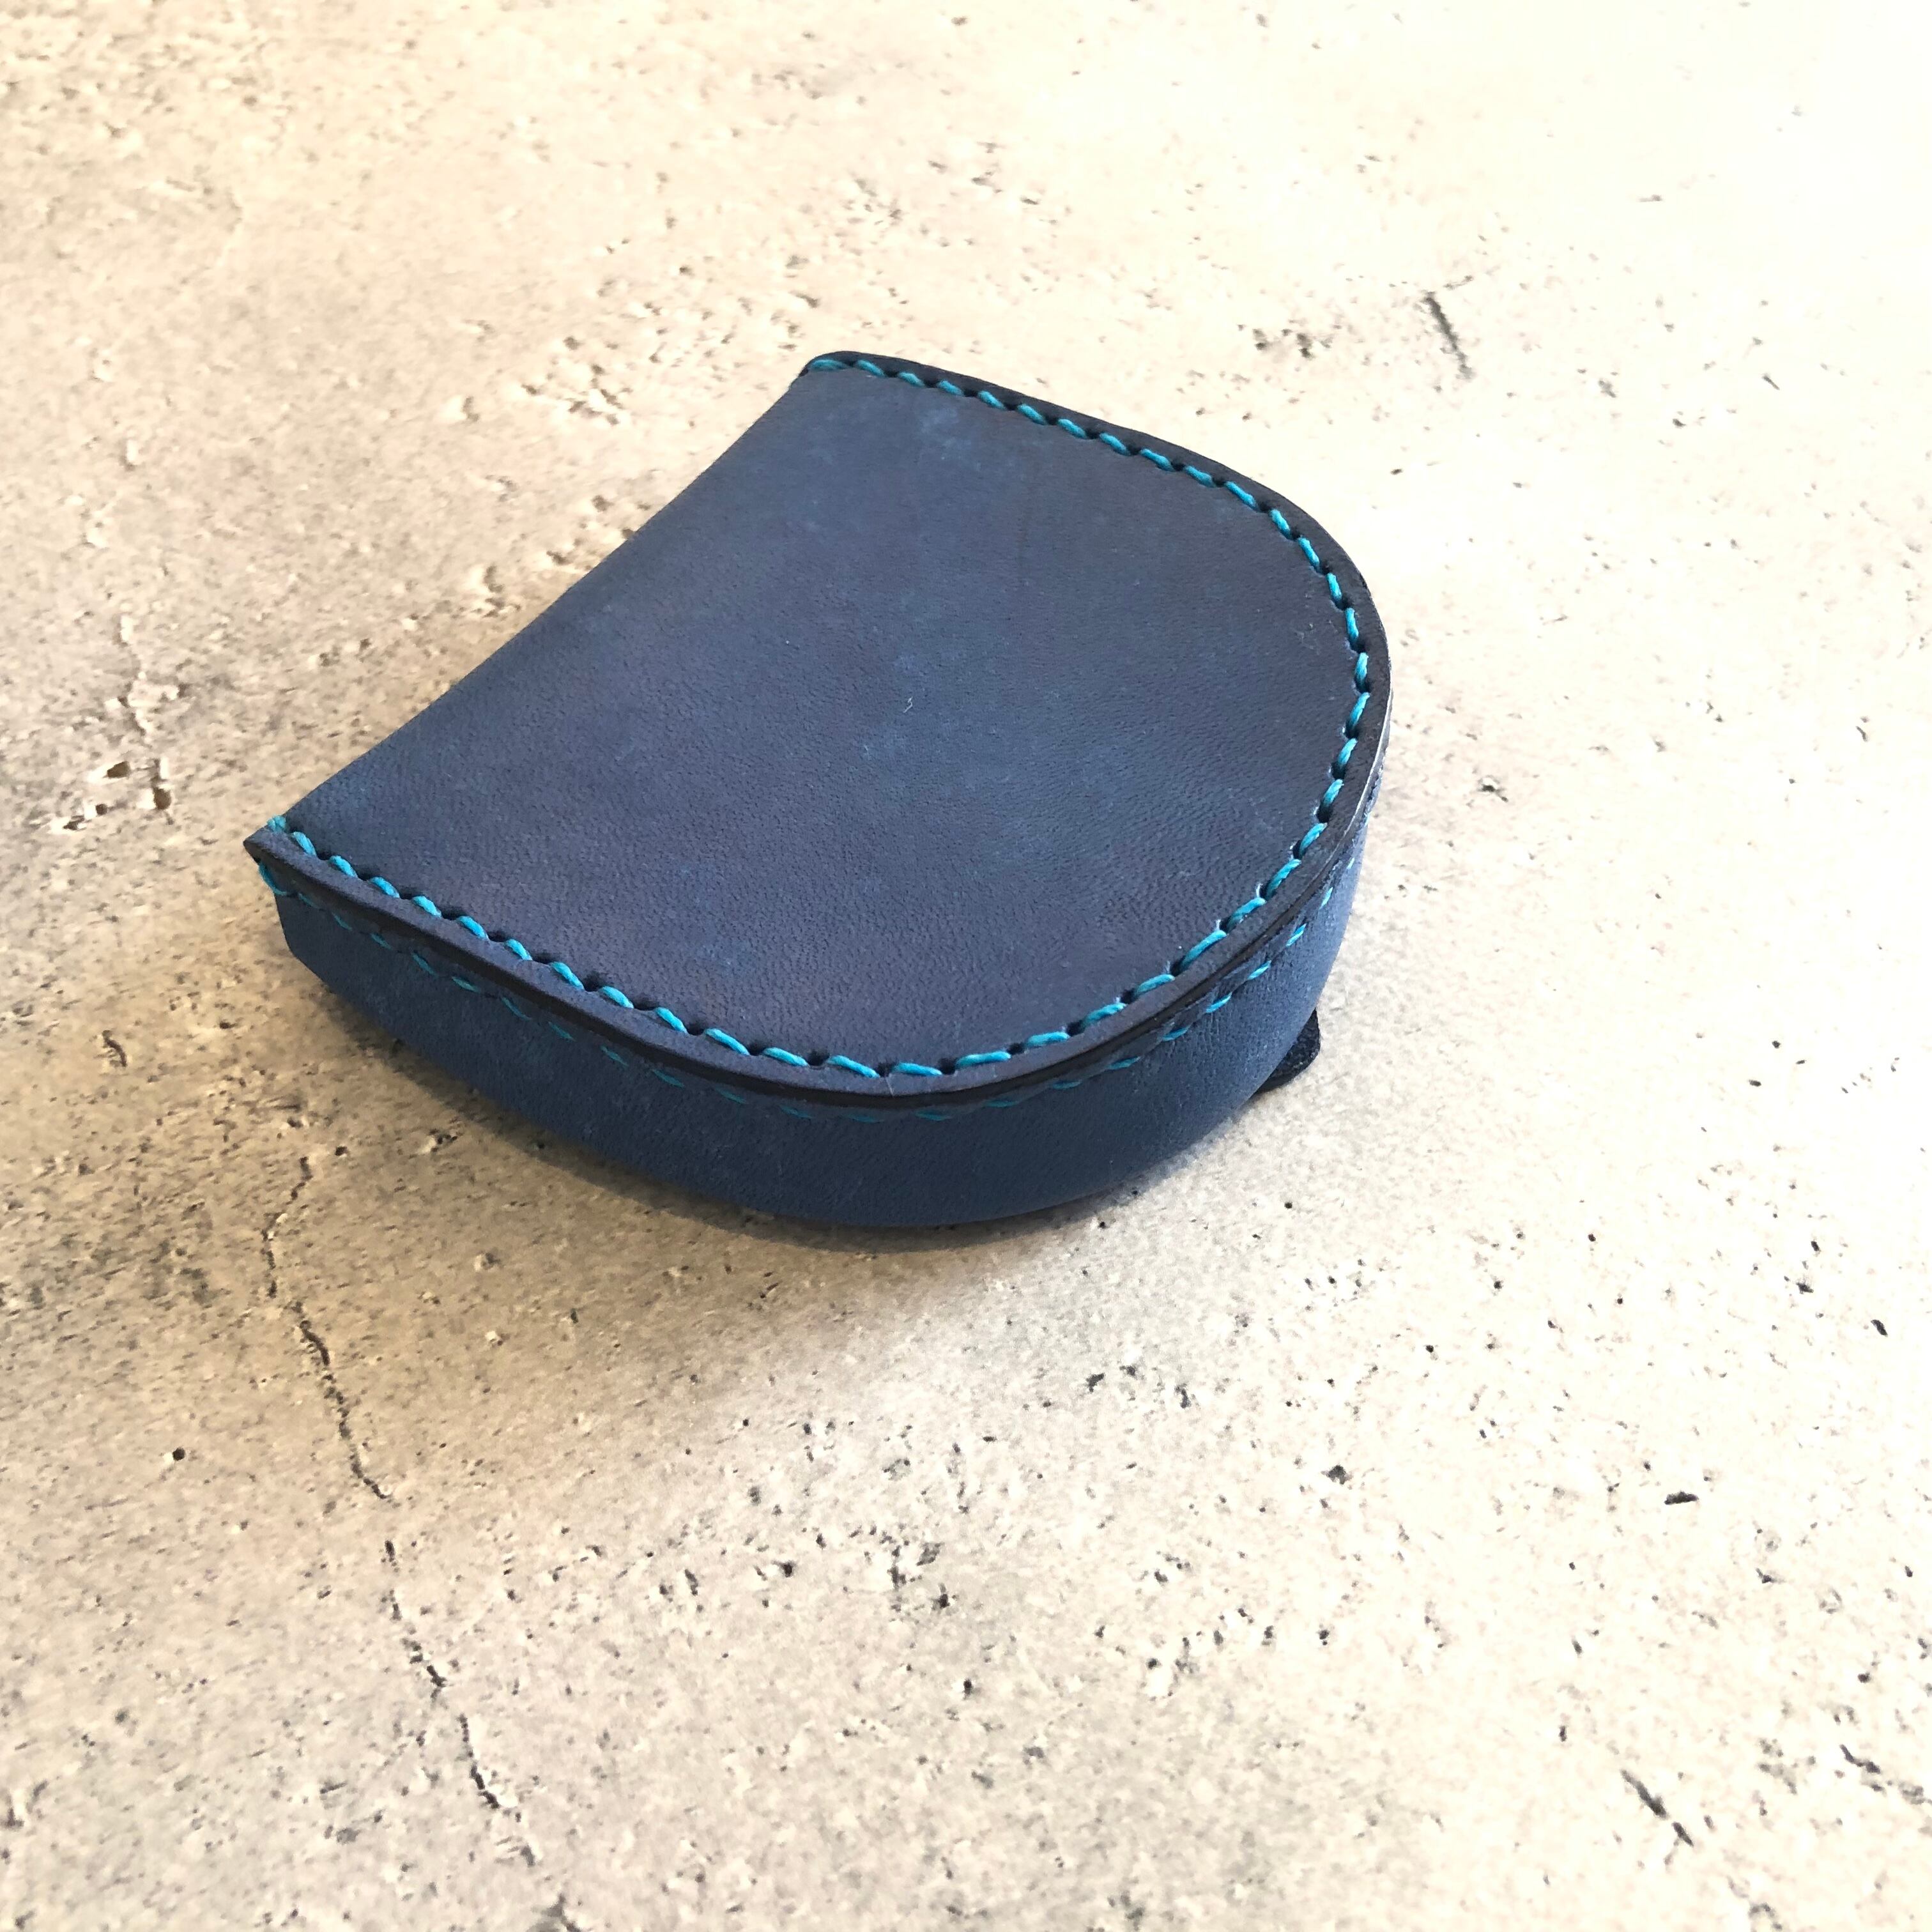 COIN CASE】馬蹄型小銭入れ コバルトブルー | 革財布・革小物の